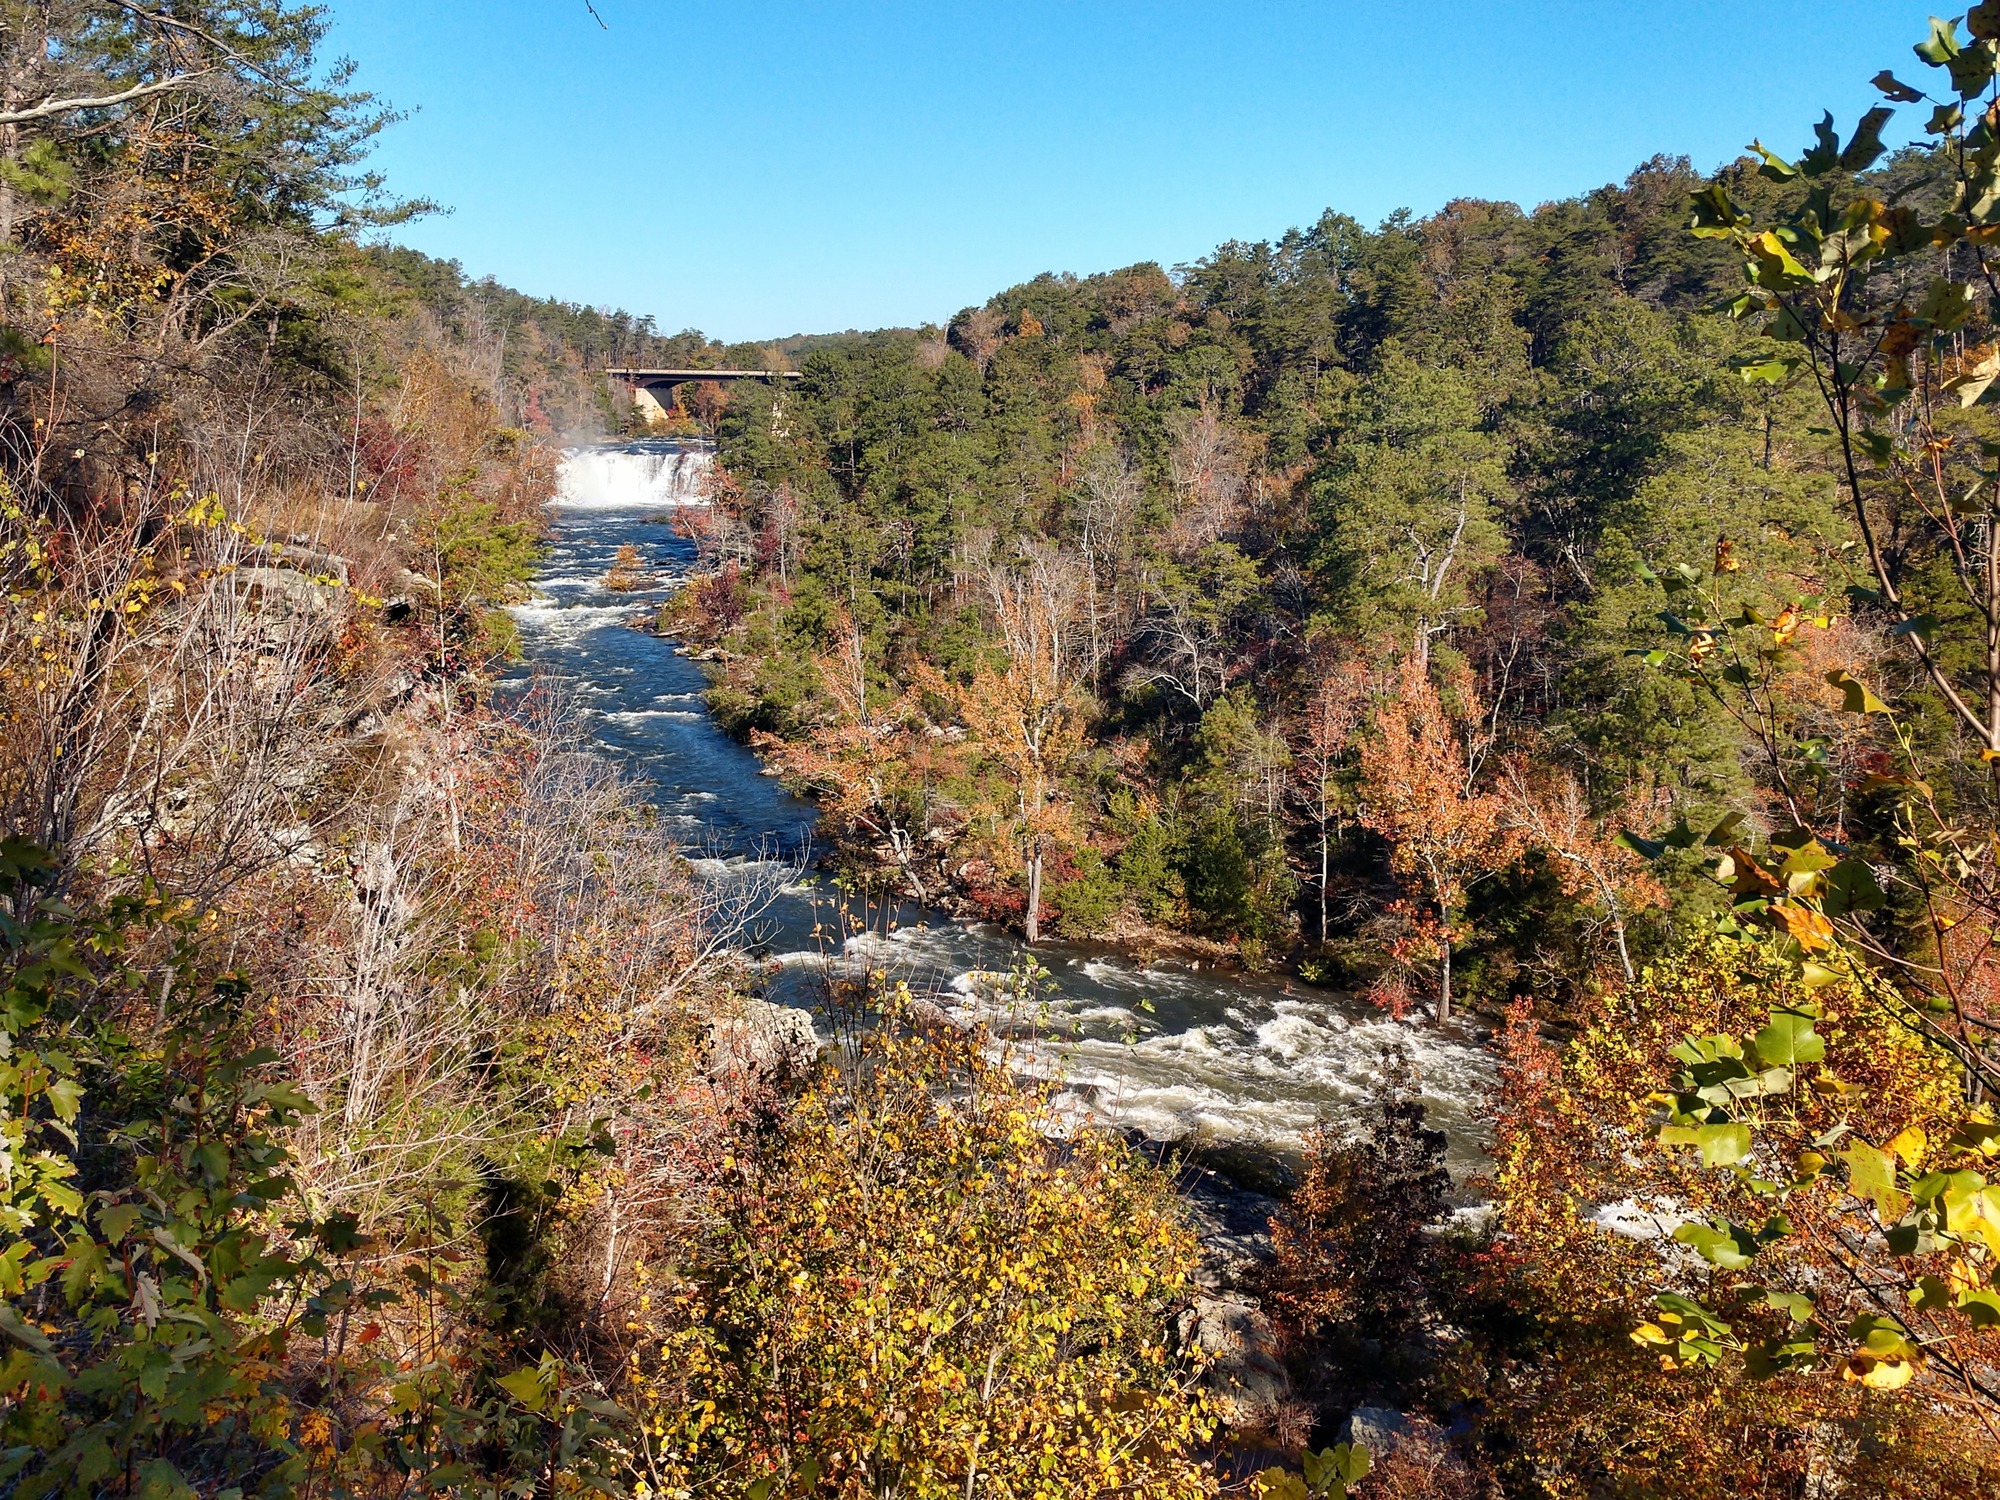 The Little River Canyon National Preserve is a beautiful park that protects over 14,000 acres of rugged mountainous country sitting on top of Lookout Mountain.